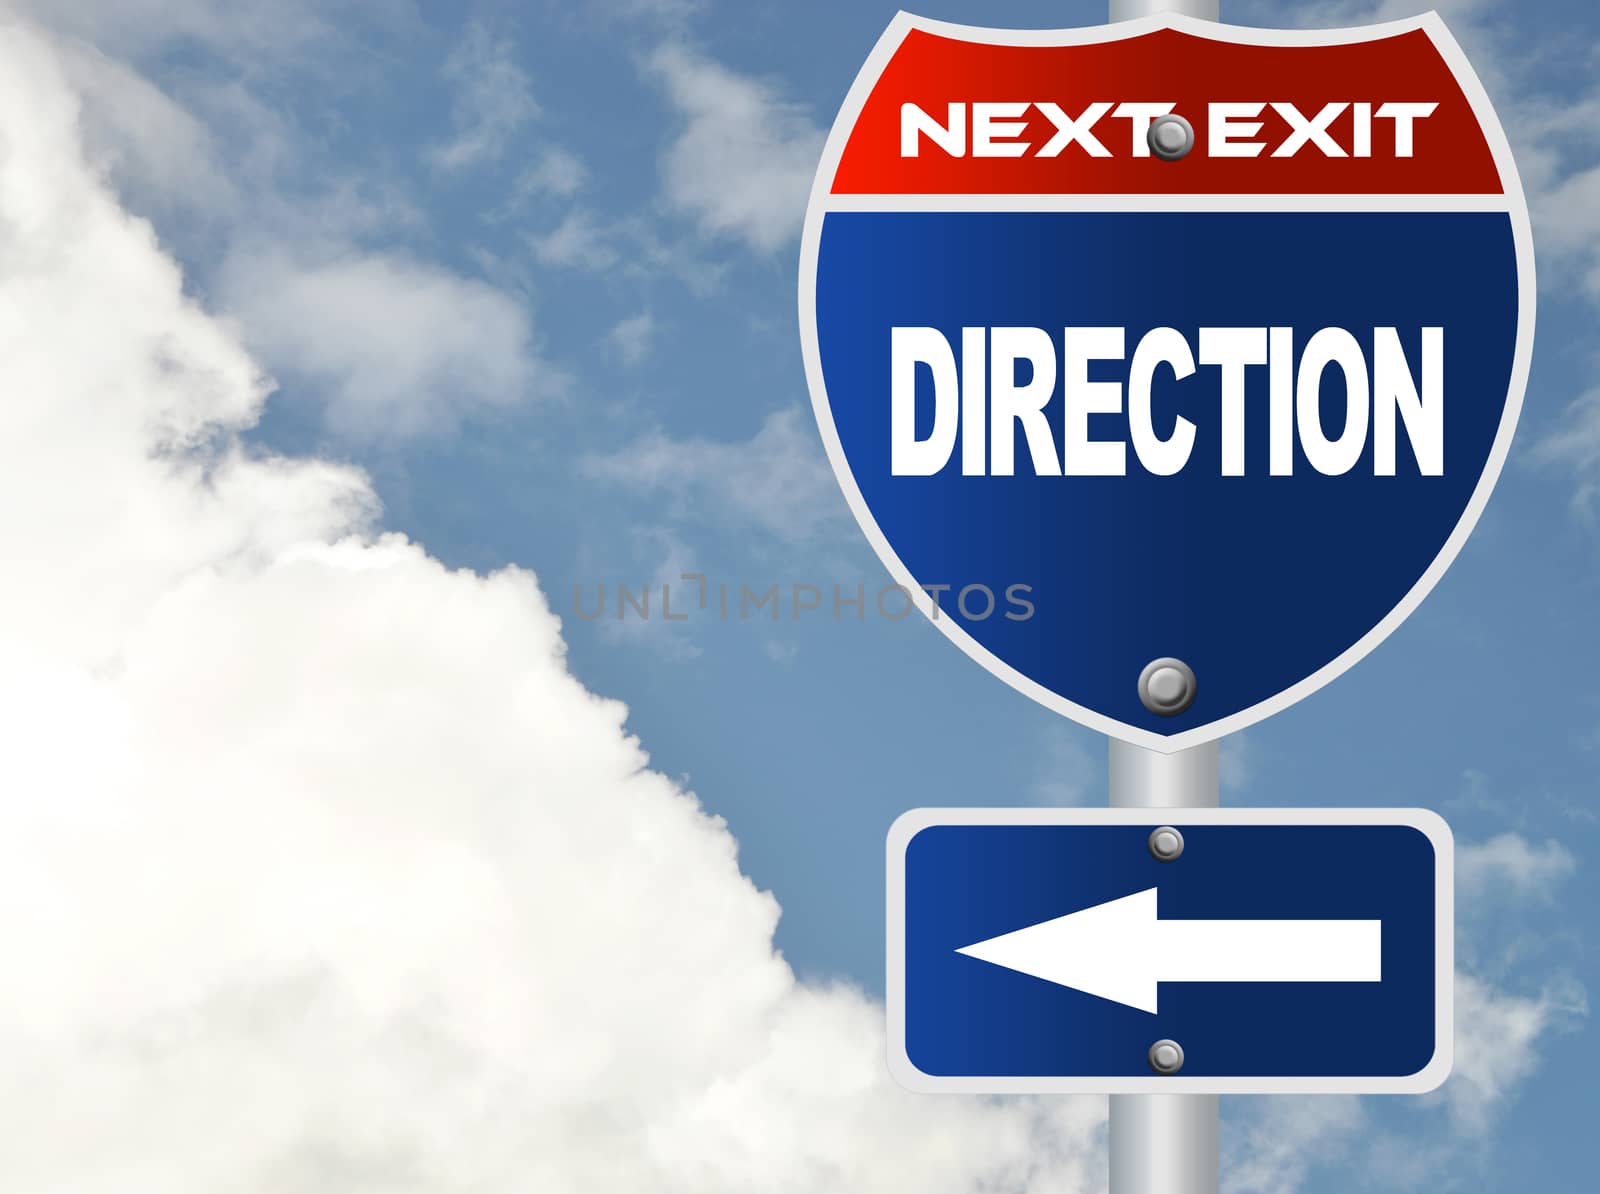 Direction road sign by payphoto